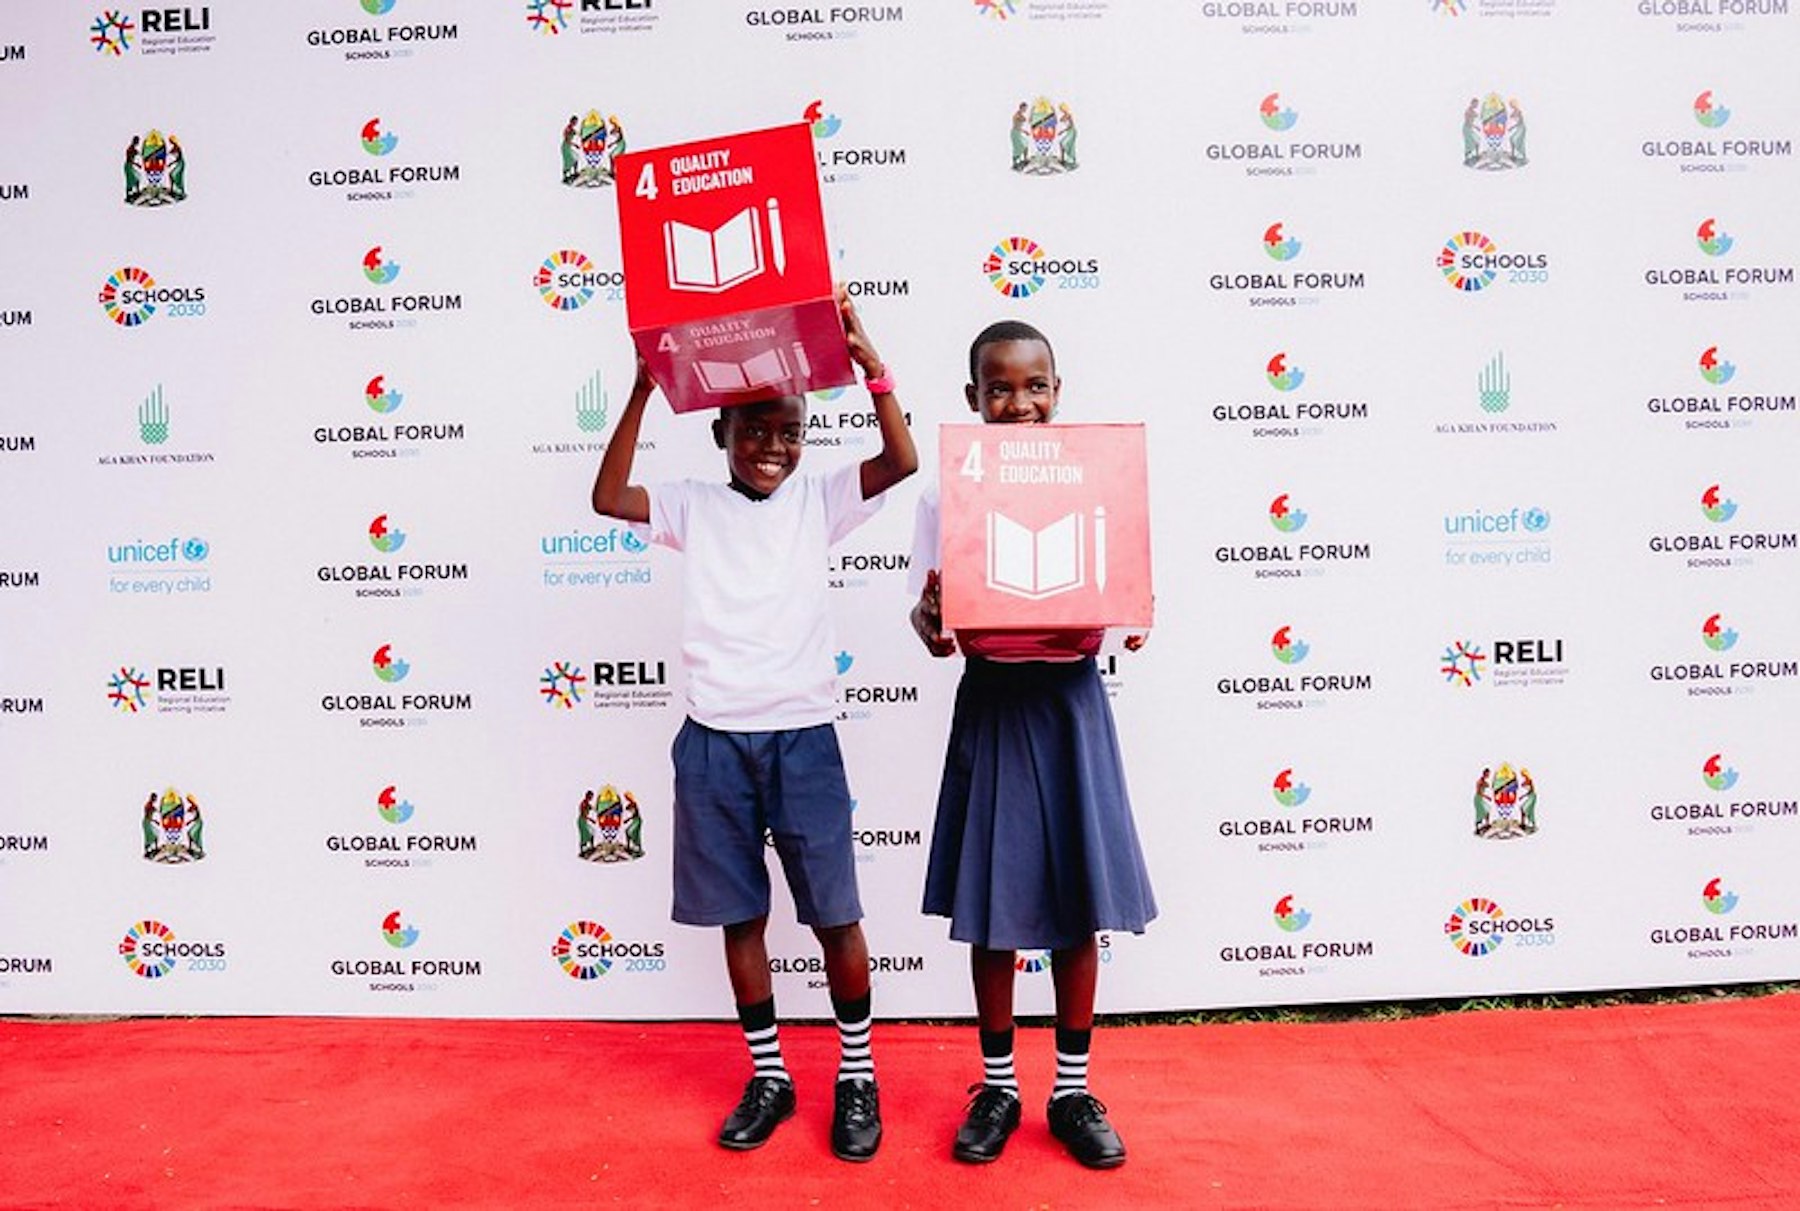 Students from local schools attended last year's Global Forum held in Dar es Salaam, Tanzania.